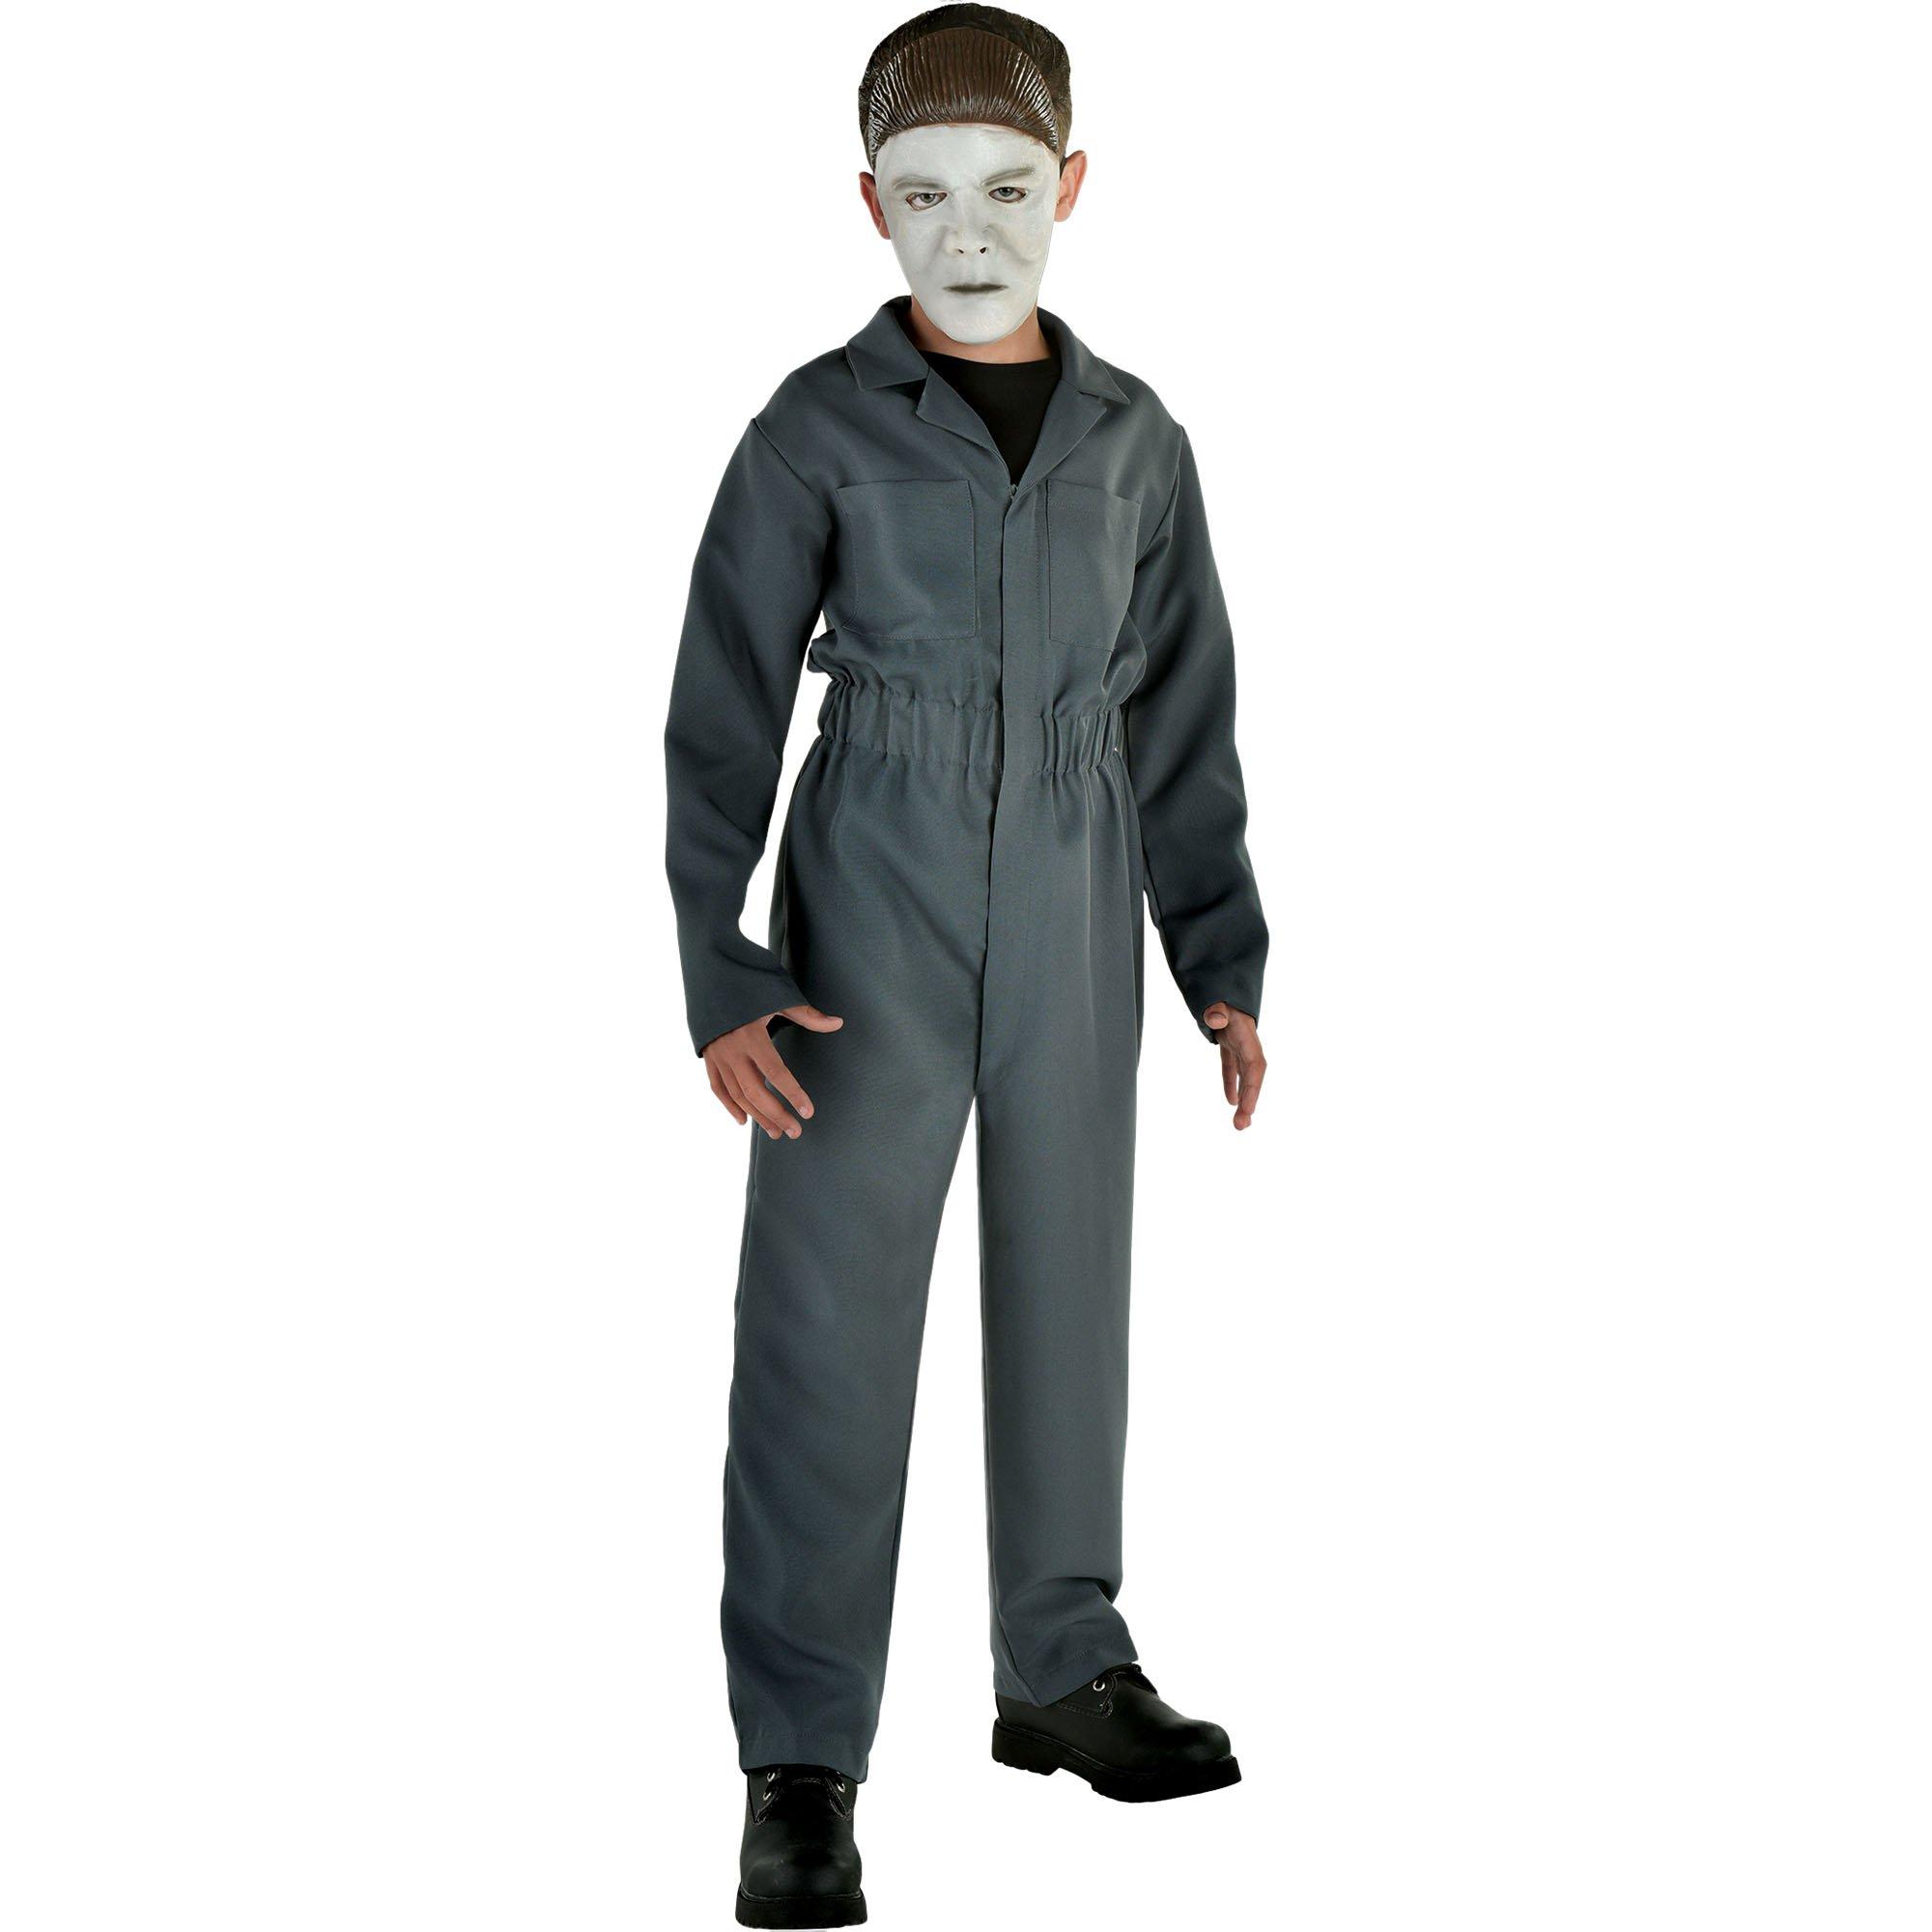 Child Michael Myers Costume - Halloween | Party City